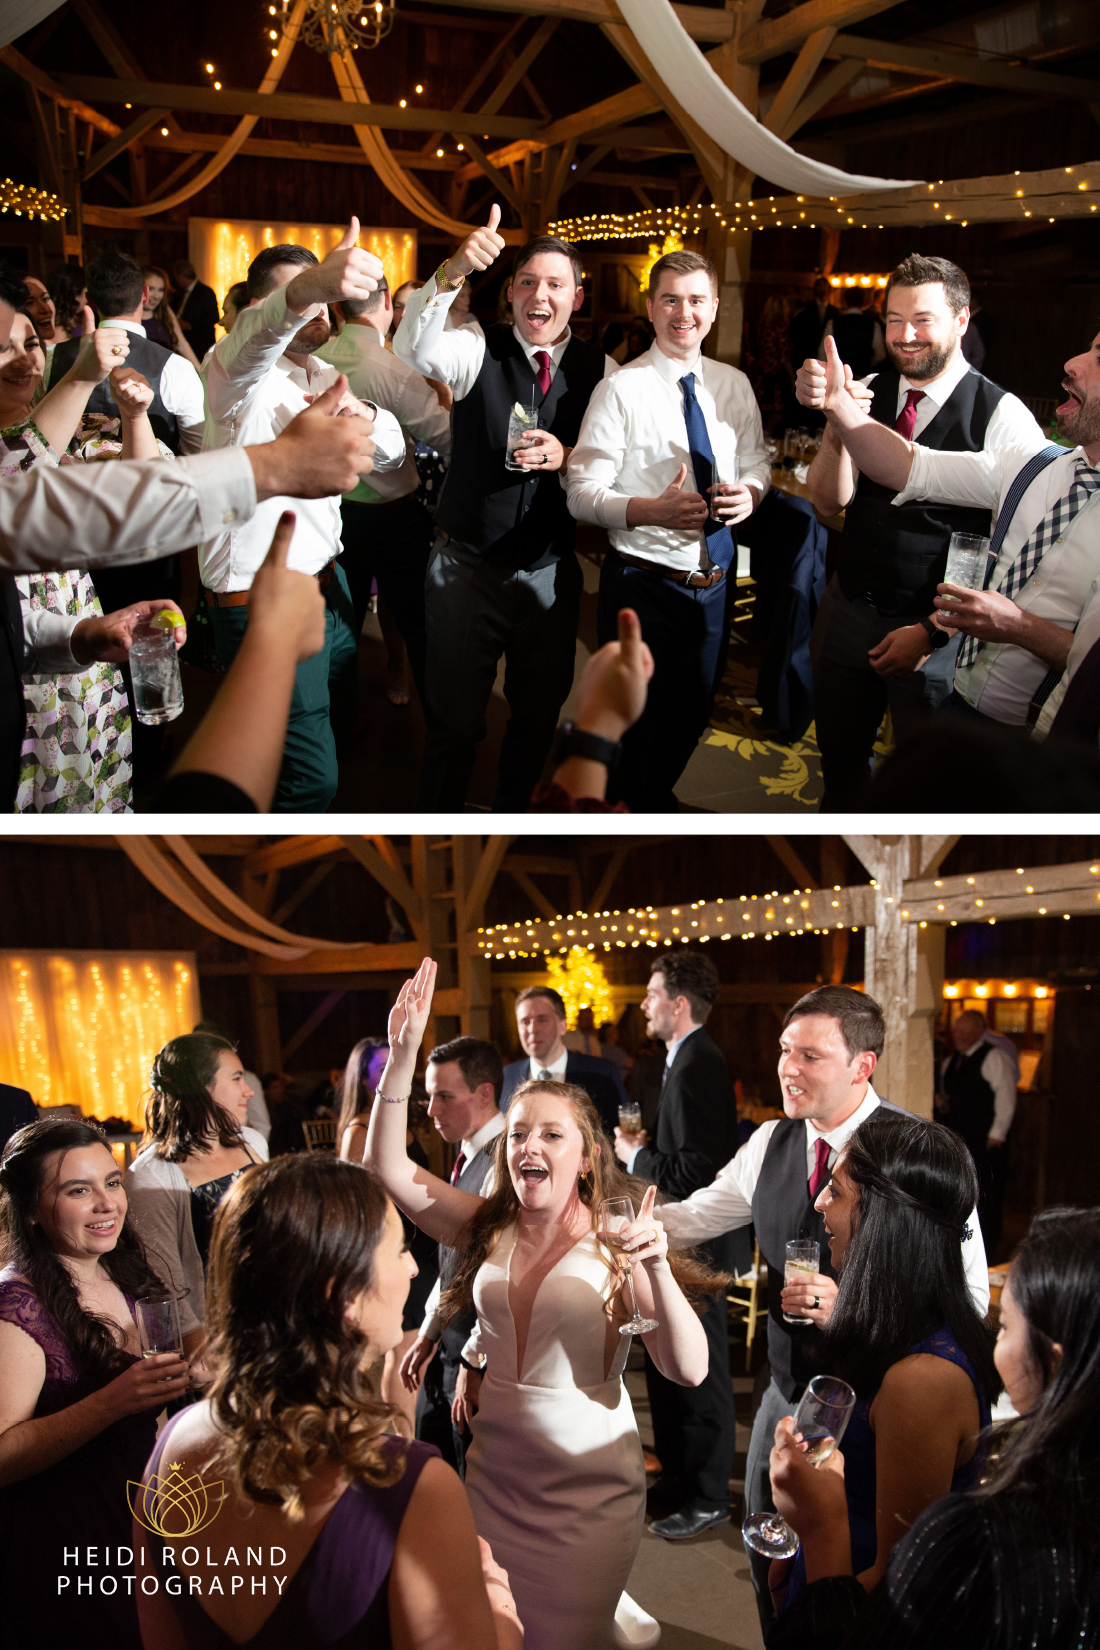 Bride and groom dancing with their loved ones during wedding reception